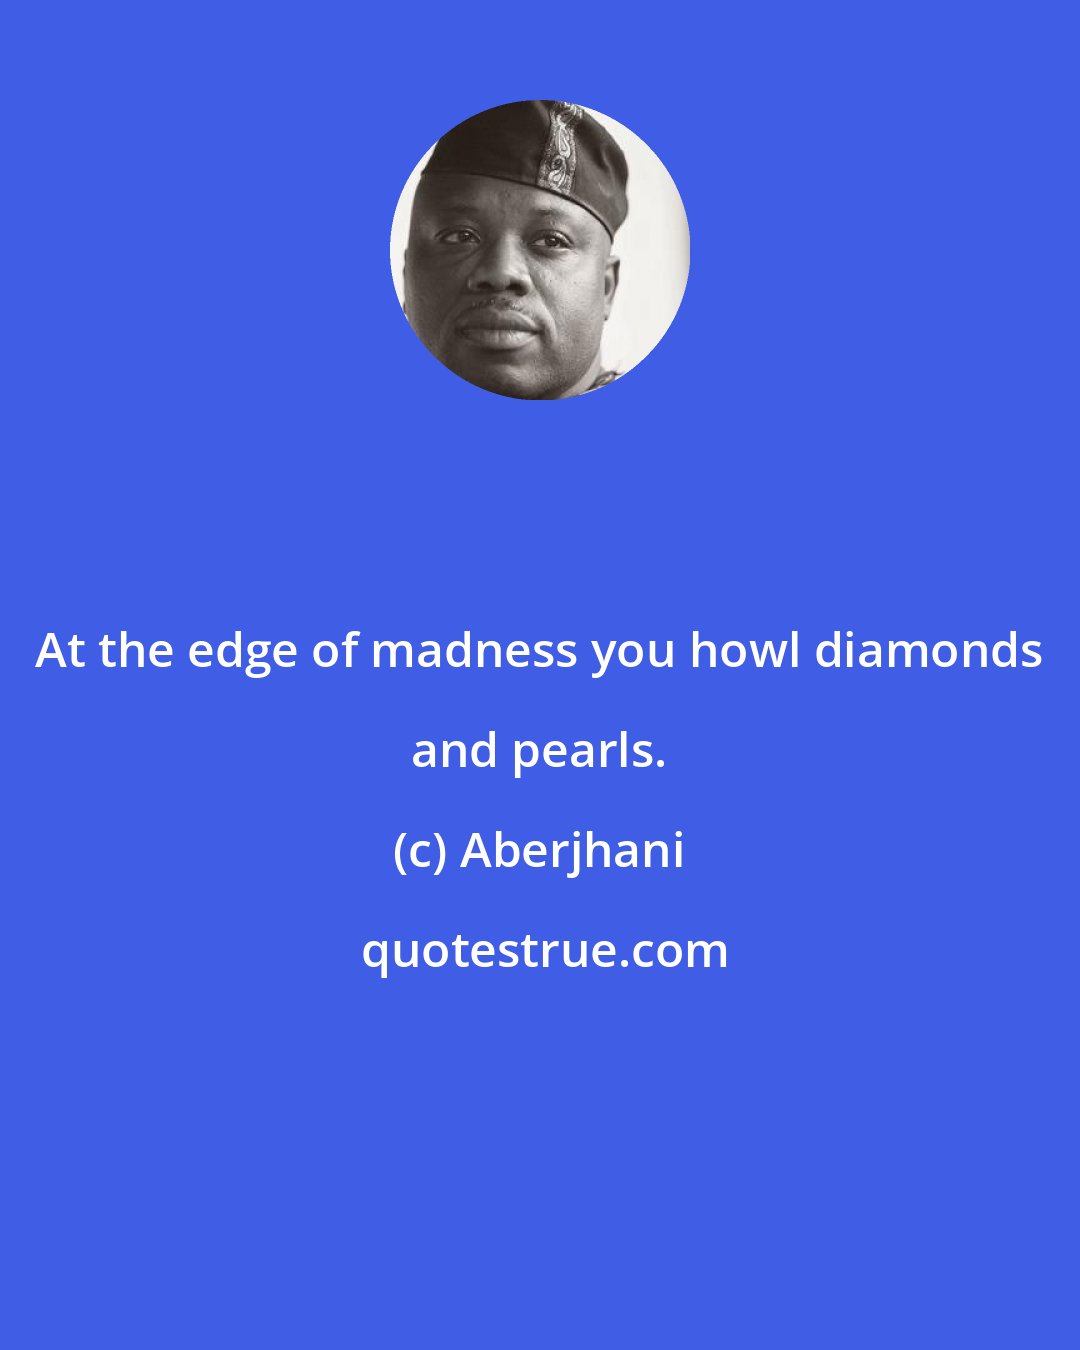 Aberjhani: At the edge of madness you howl diamonds and pearls.